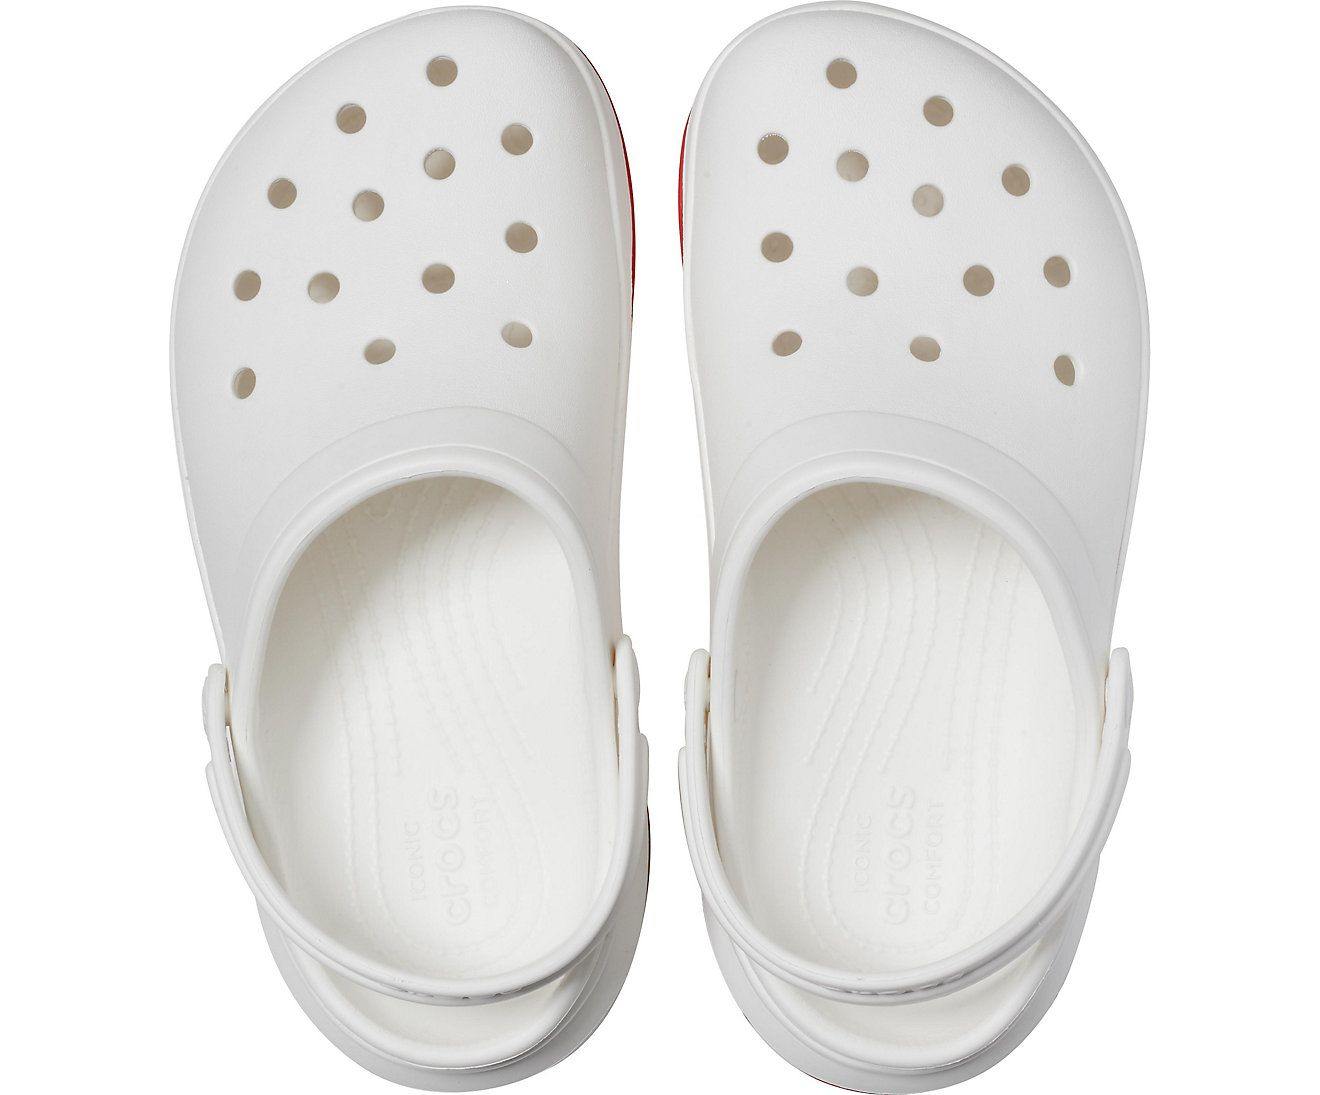 Authentic Crocband Full Force Clog - White